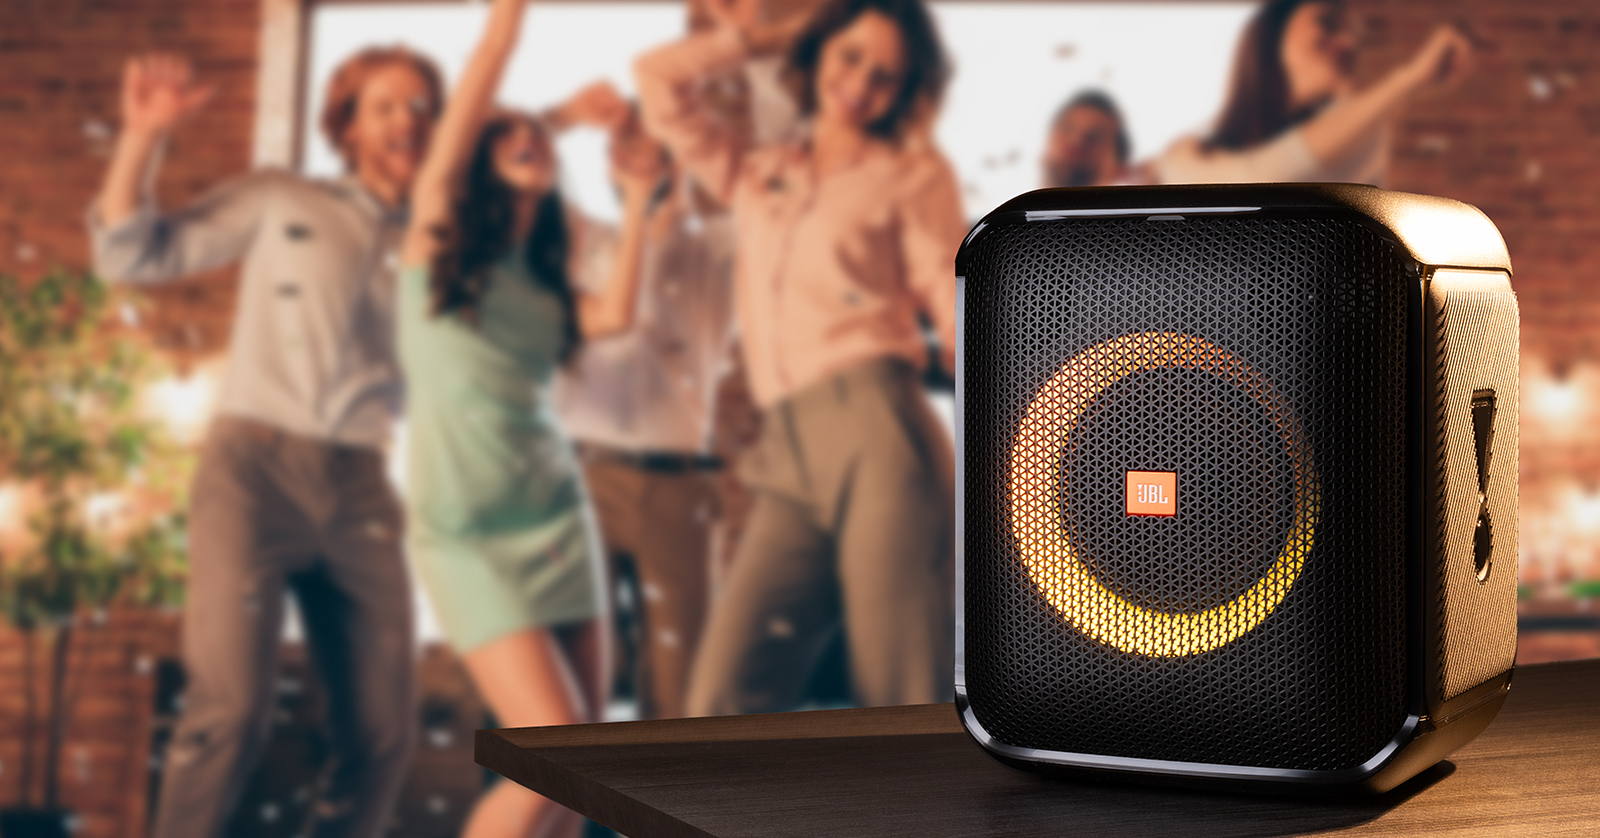 The best Bluetooth speakers in 2023, chosen by experts